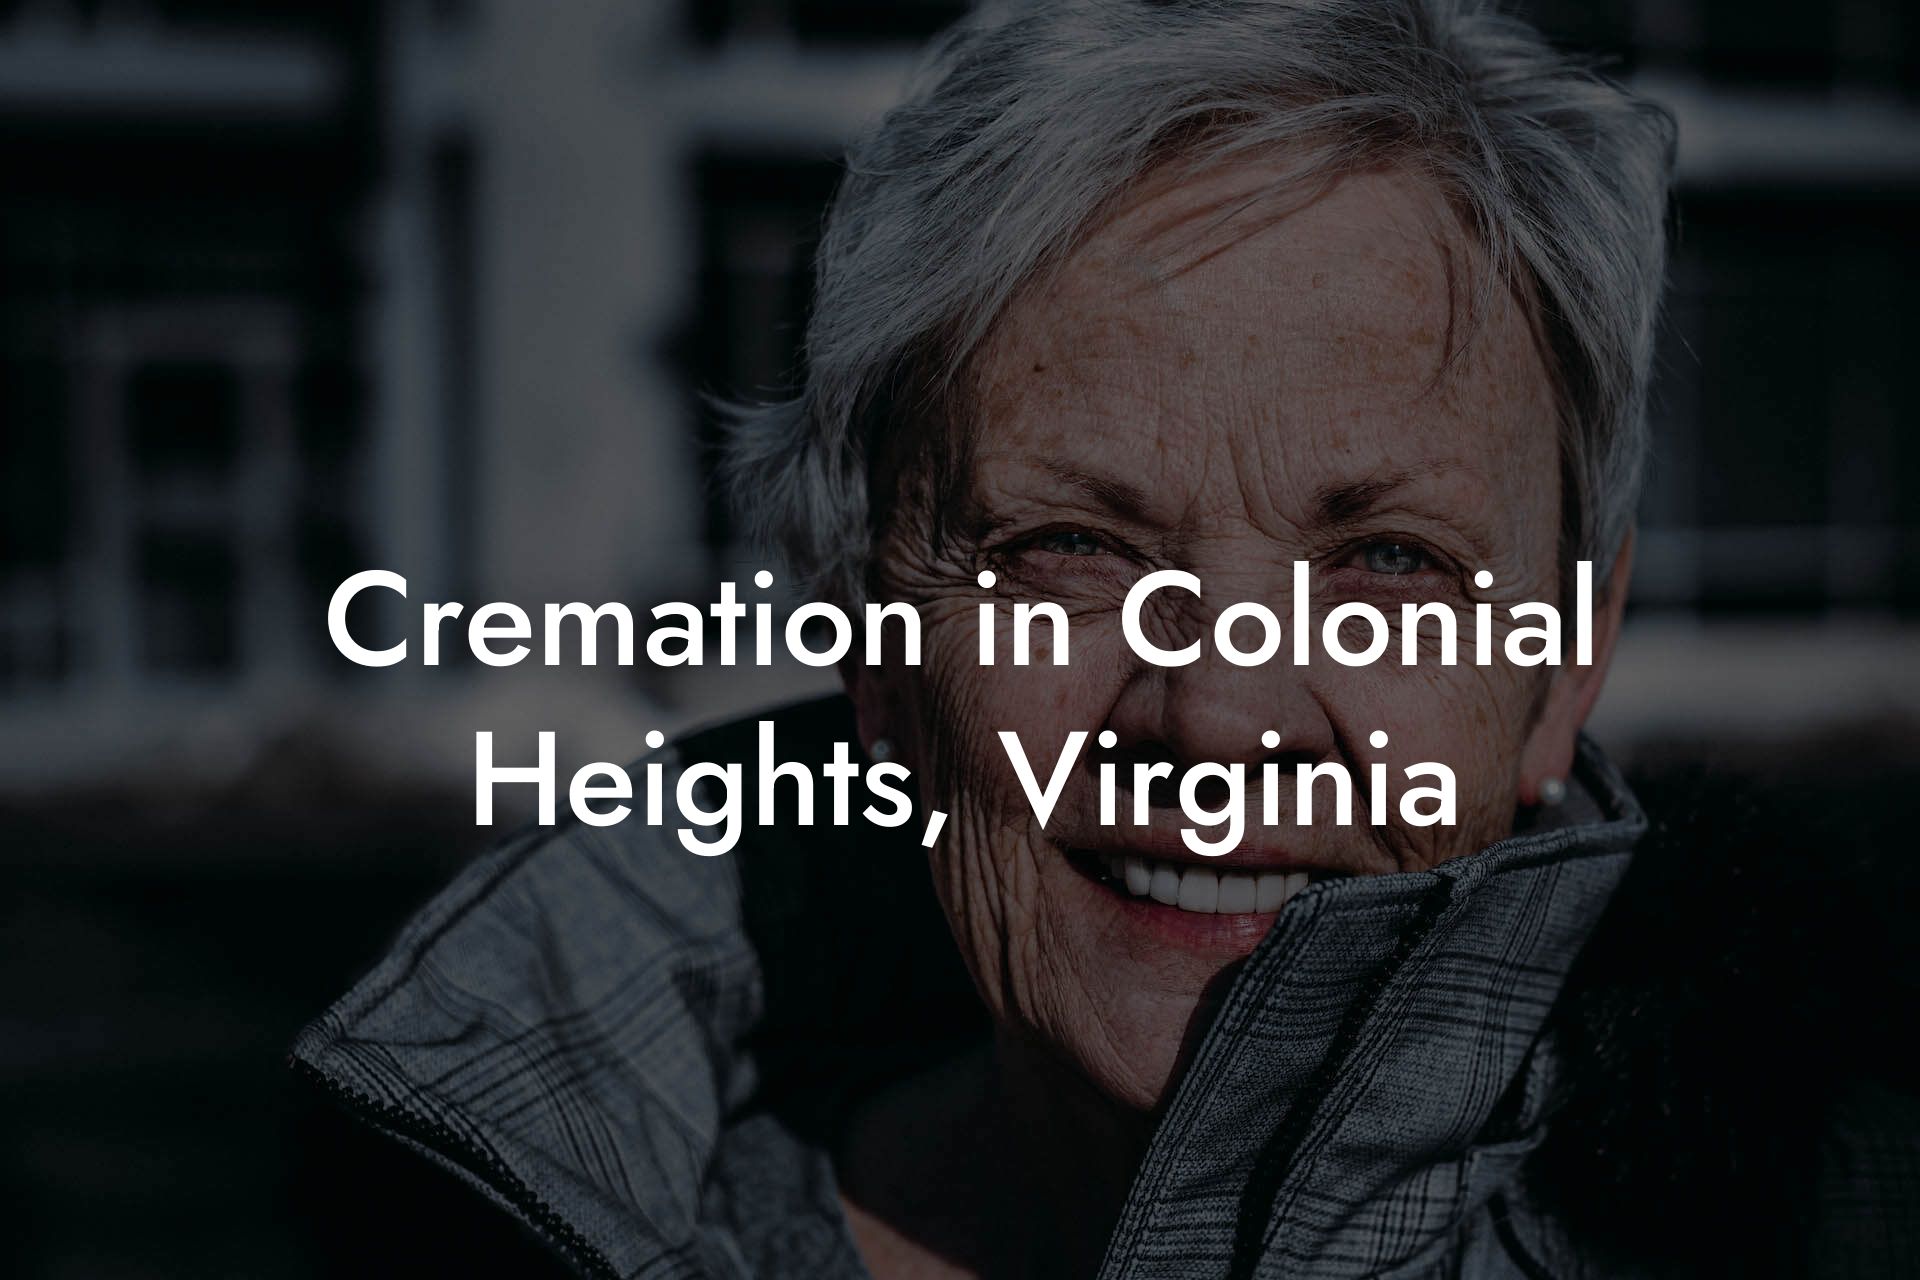 Cremation in Colonial Heights, Virginia